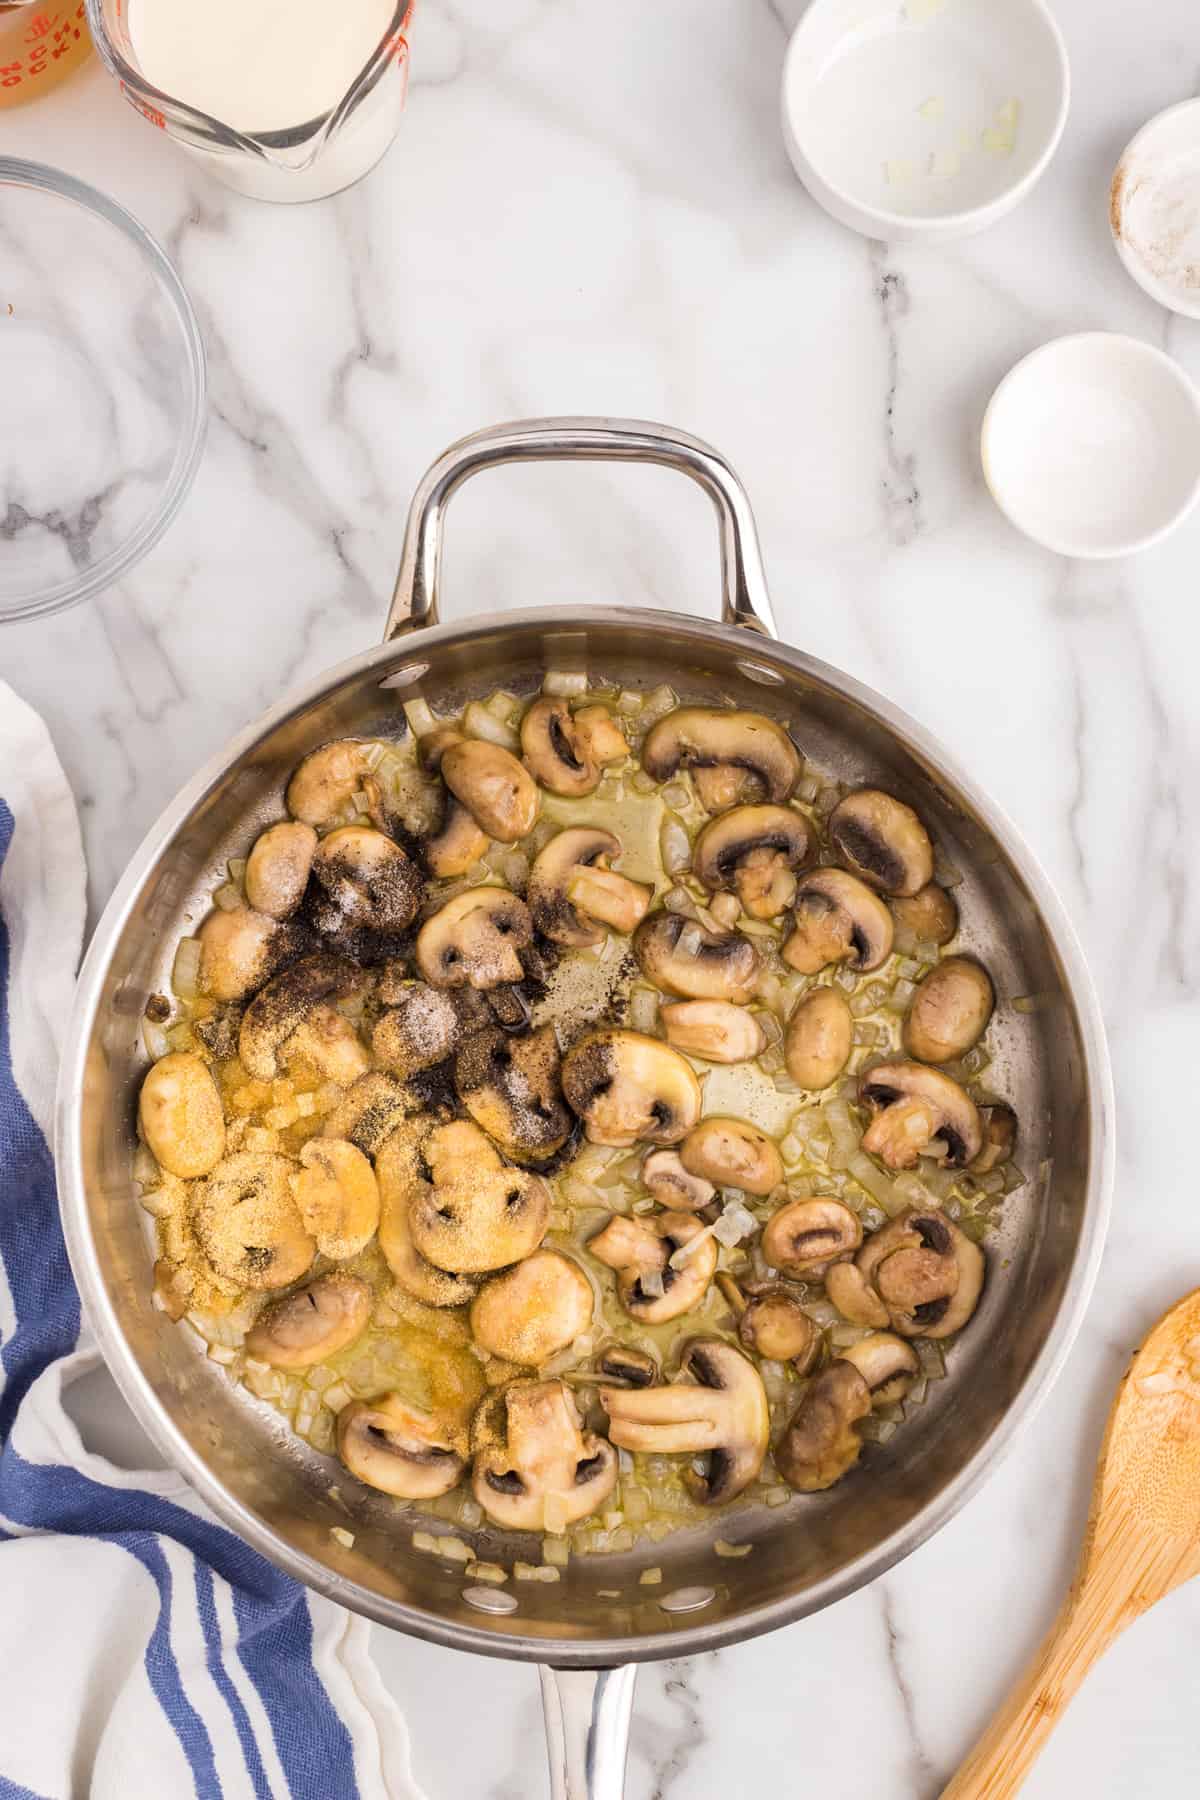 Cooked mushrooms and onions for Chicken ala King recipe in stovetop skillet